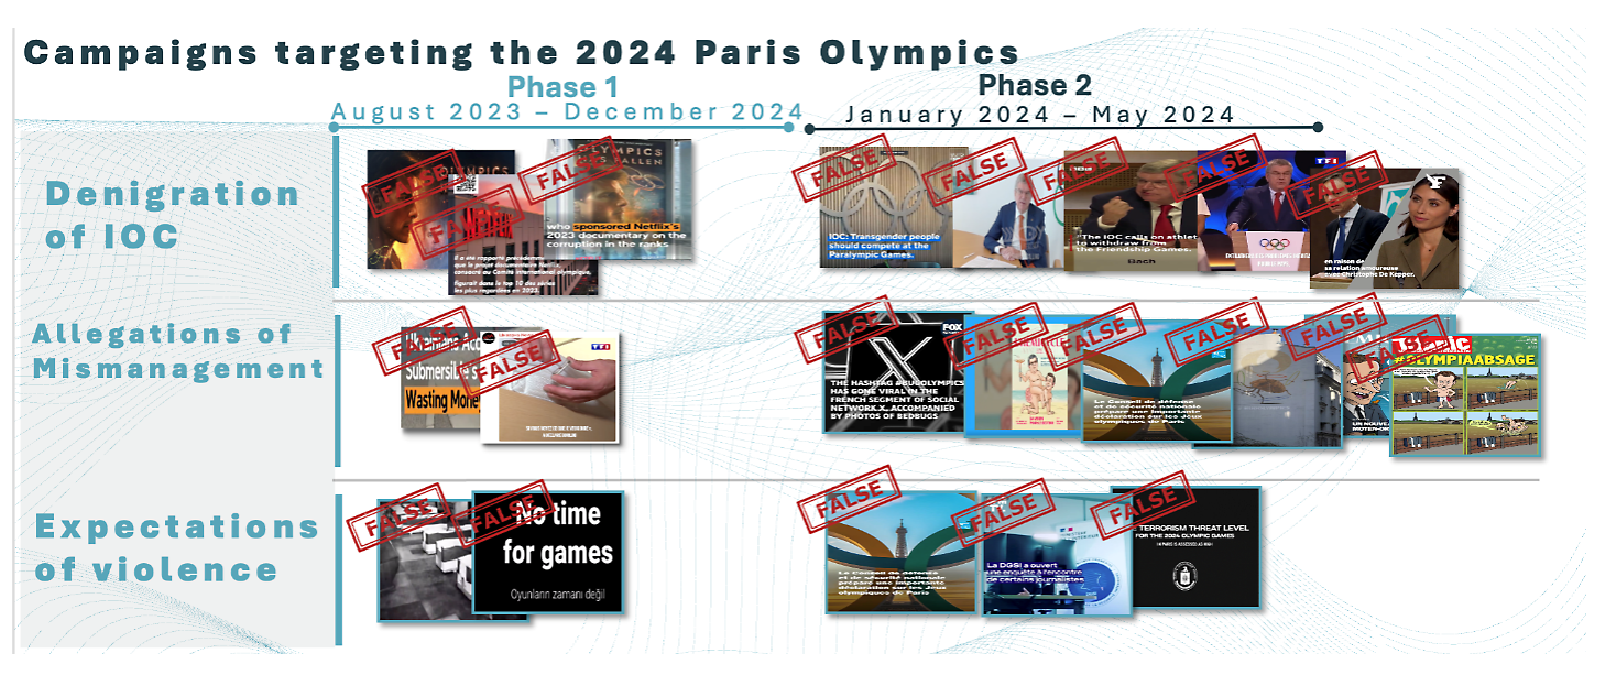 A graphic representation of a timeline labeled “Campaigns targeting the 2024 Paris Olympics,” divided into two phases. Phase 1 spans from August 2023 to December 2023 and Phase 2 runs from January 2024 to May 2024. There are three campaigns categories listed in the graphic, the first one is called “Denigration of IOC”, the second one is called “Allegations of Mismanagement,” and the third one is called “Expectation of violence”. Each campaign shows various negative news headlines and articles that are present in both phases. 